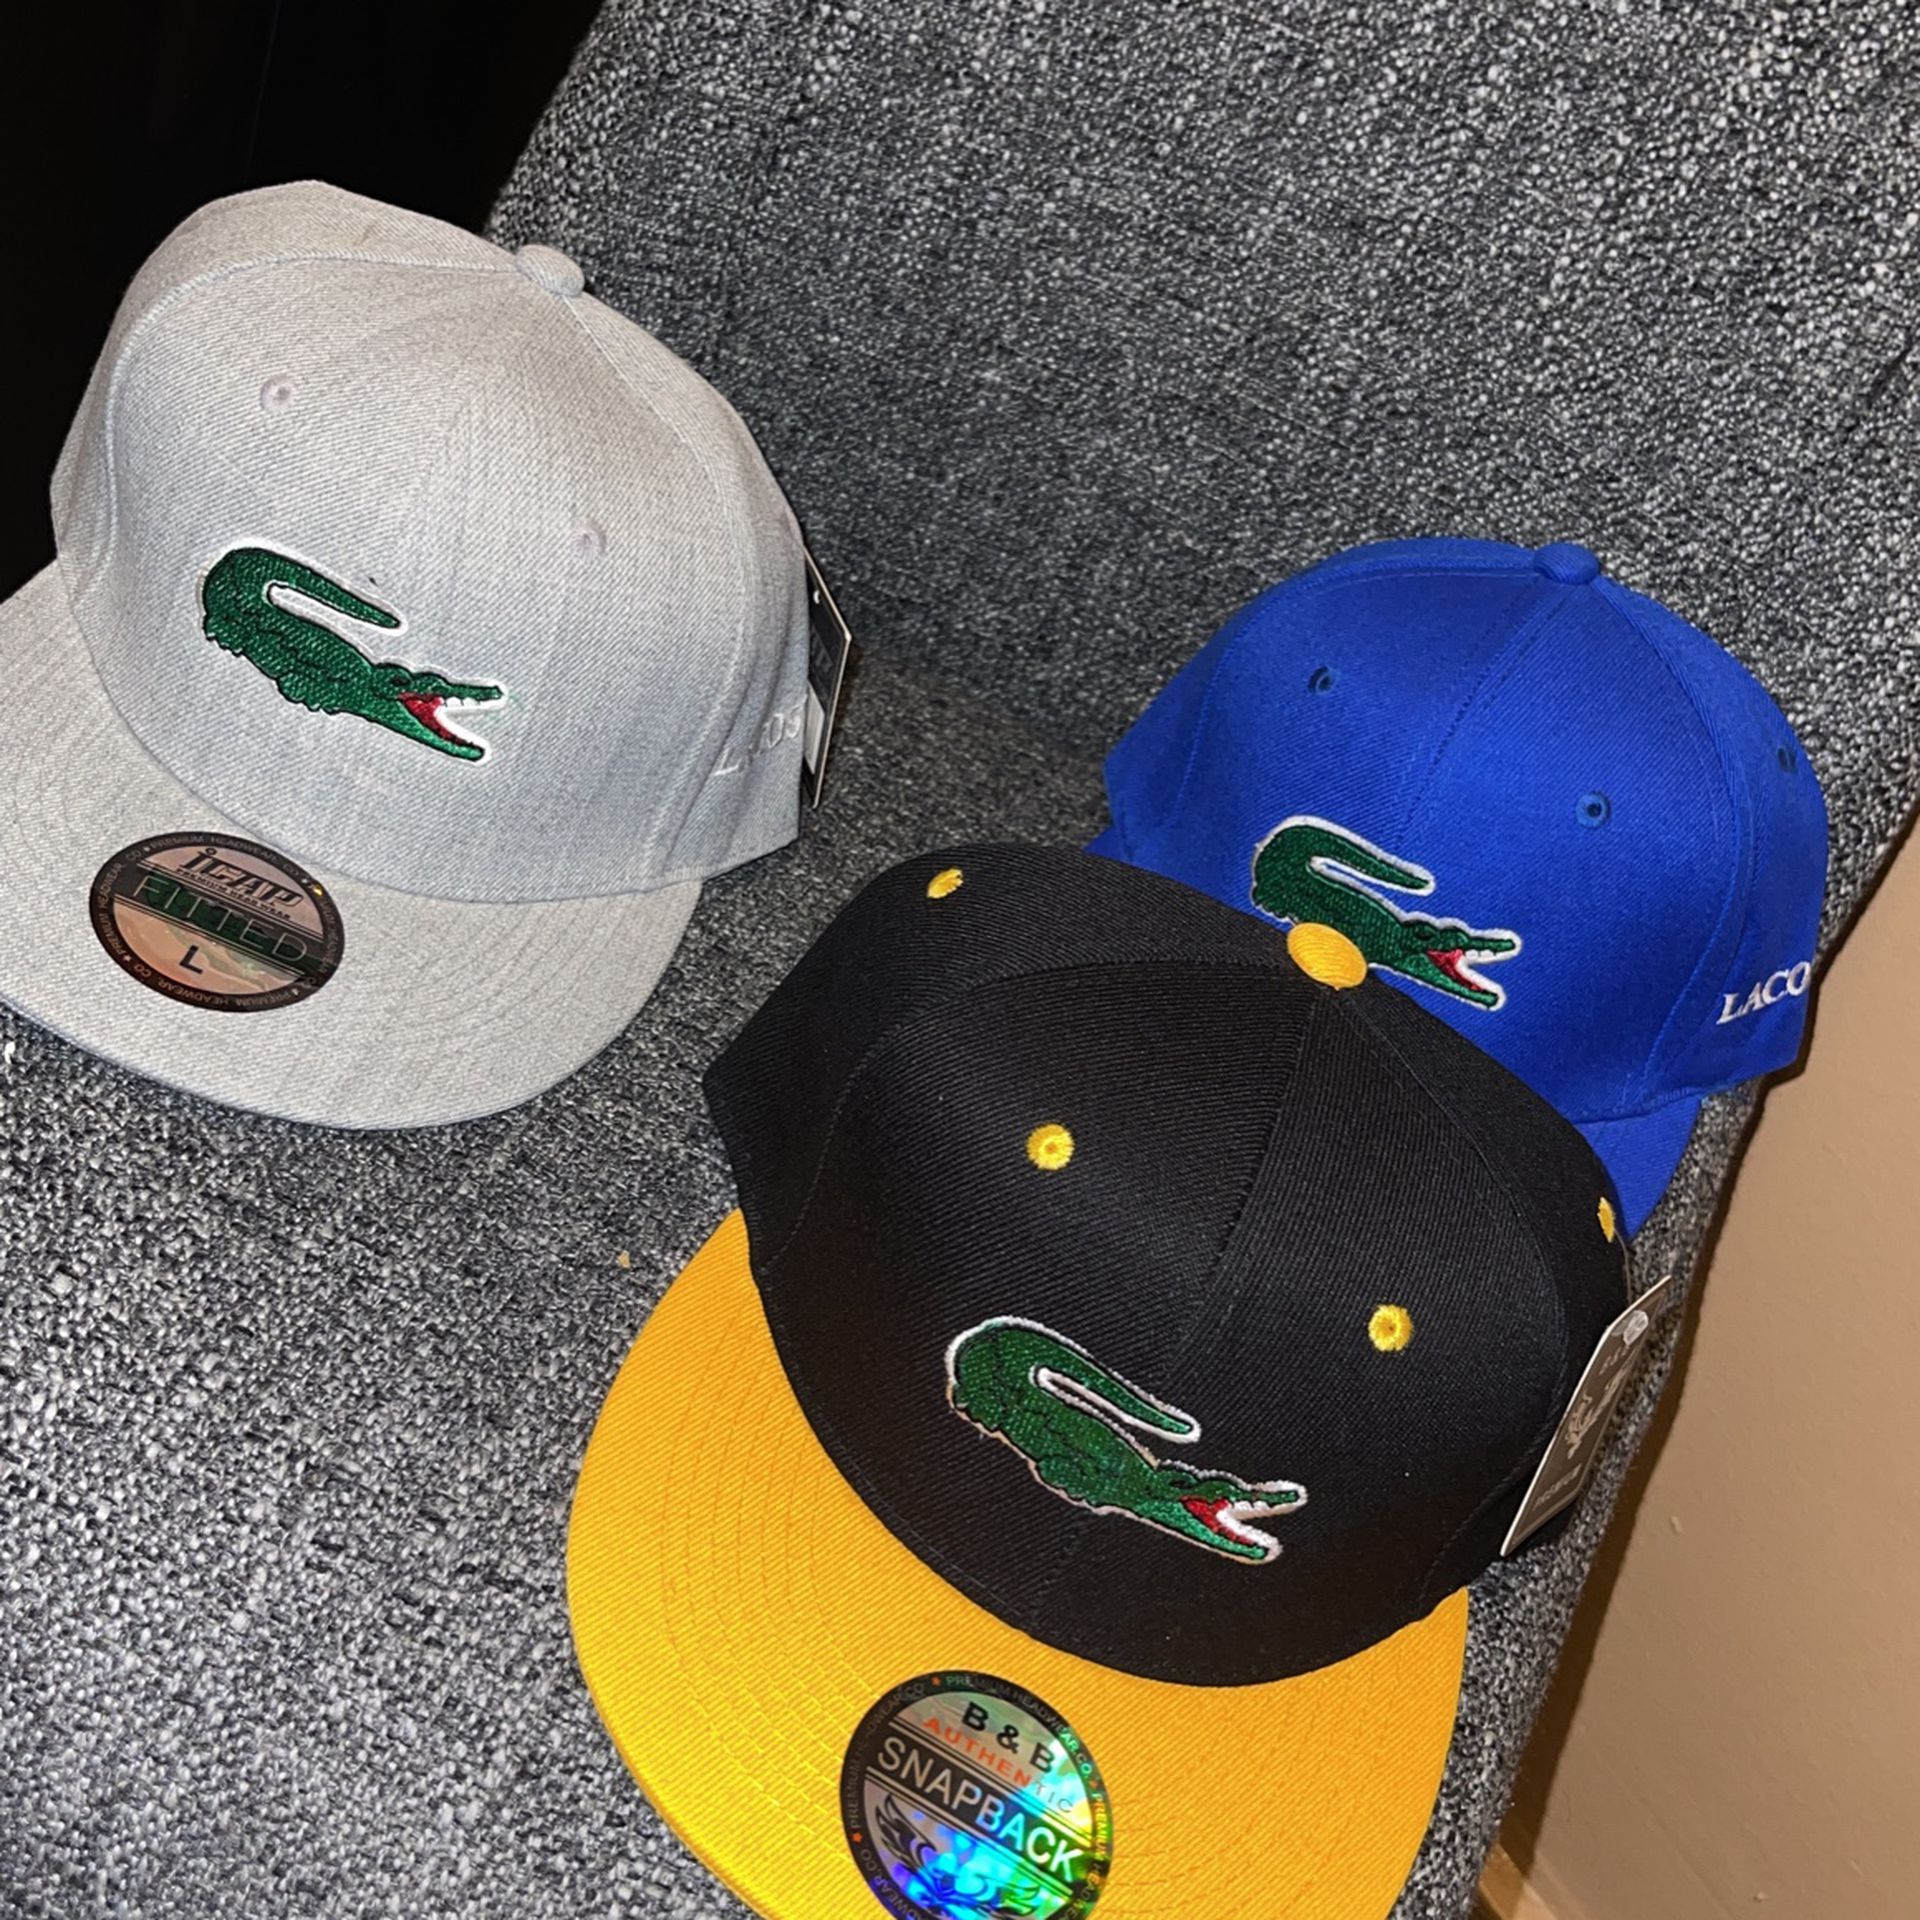 Mammoth ven Vågn op Lacoste Hats for Sale in The Bronx, NY - OfferUp